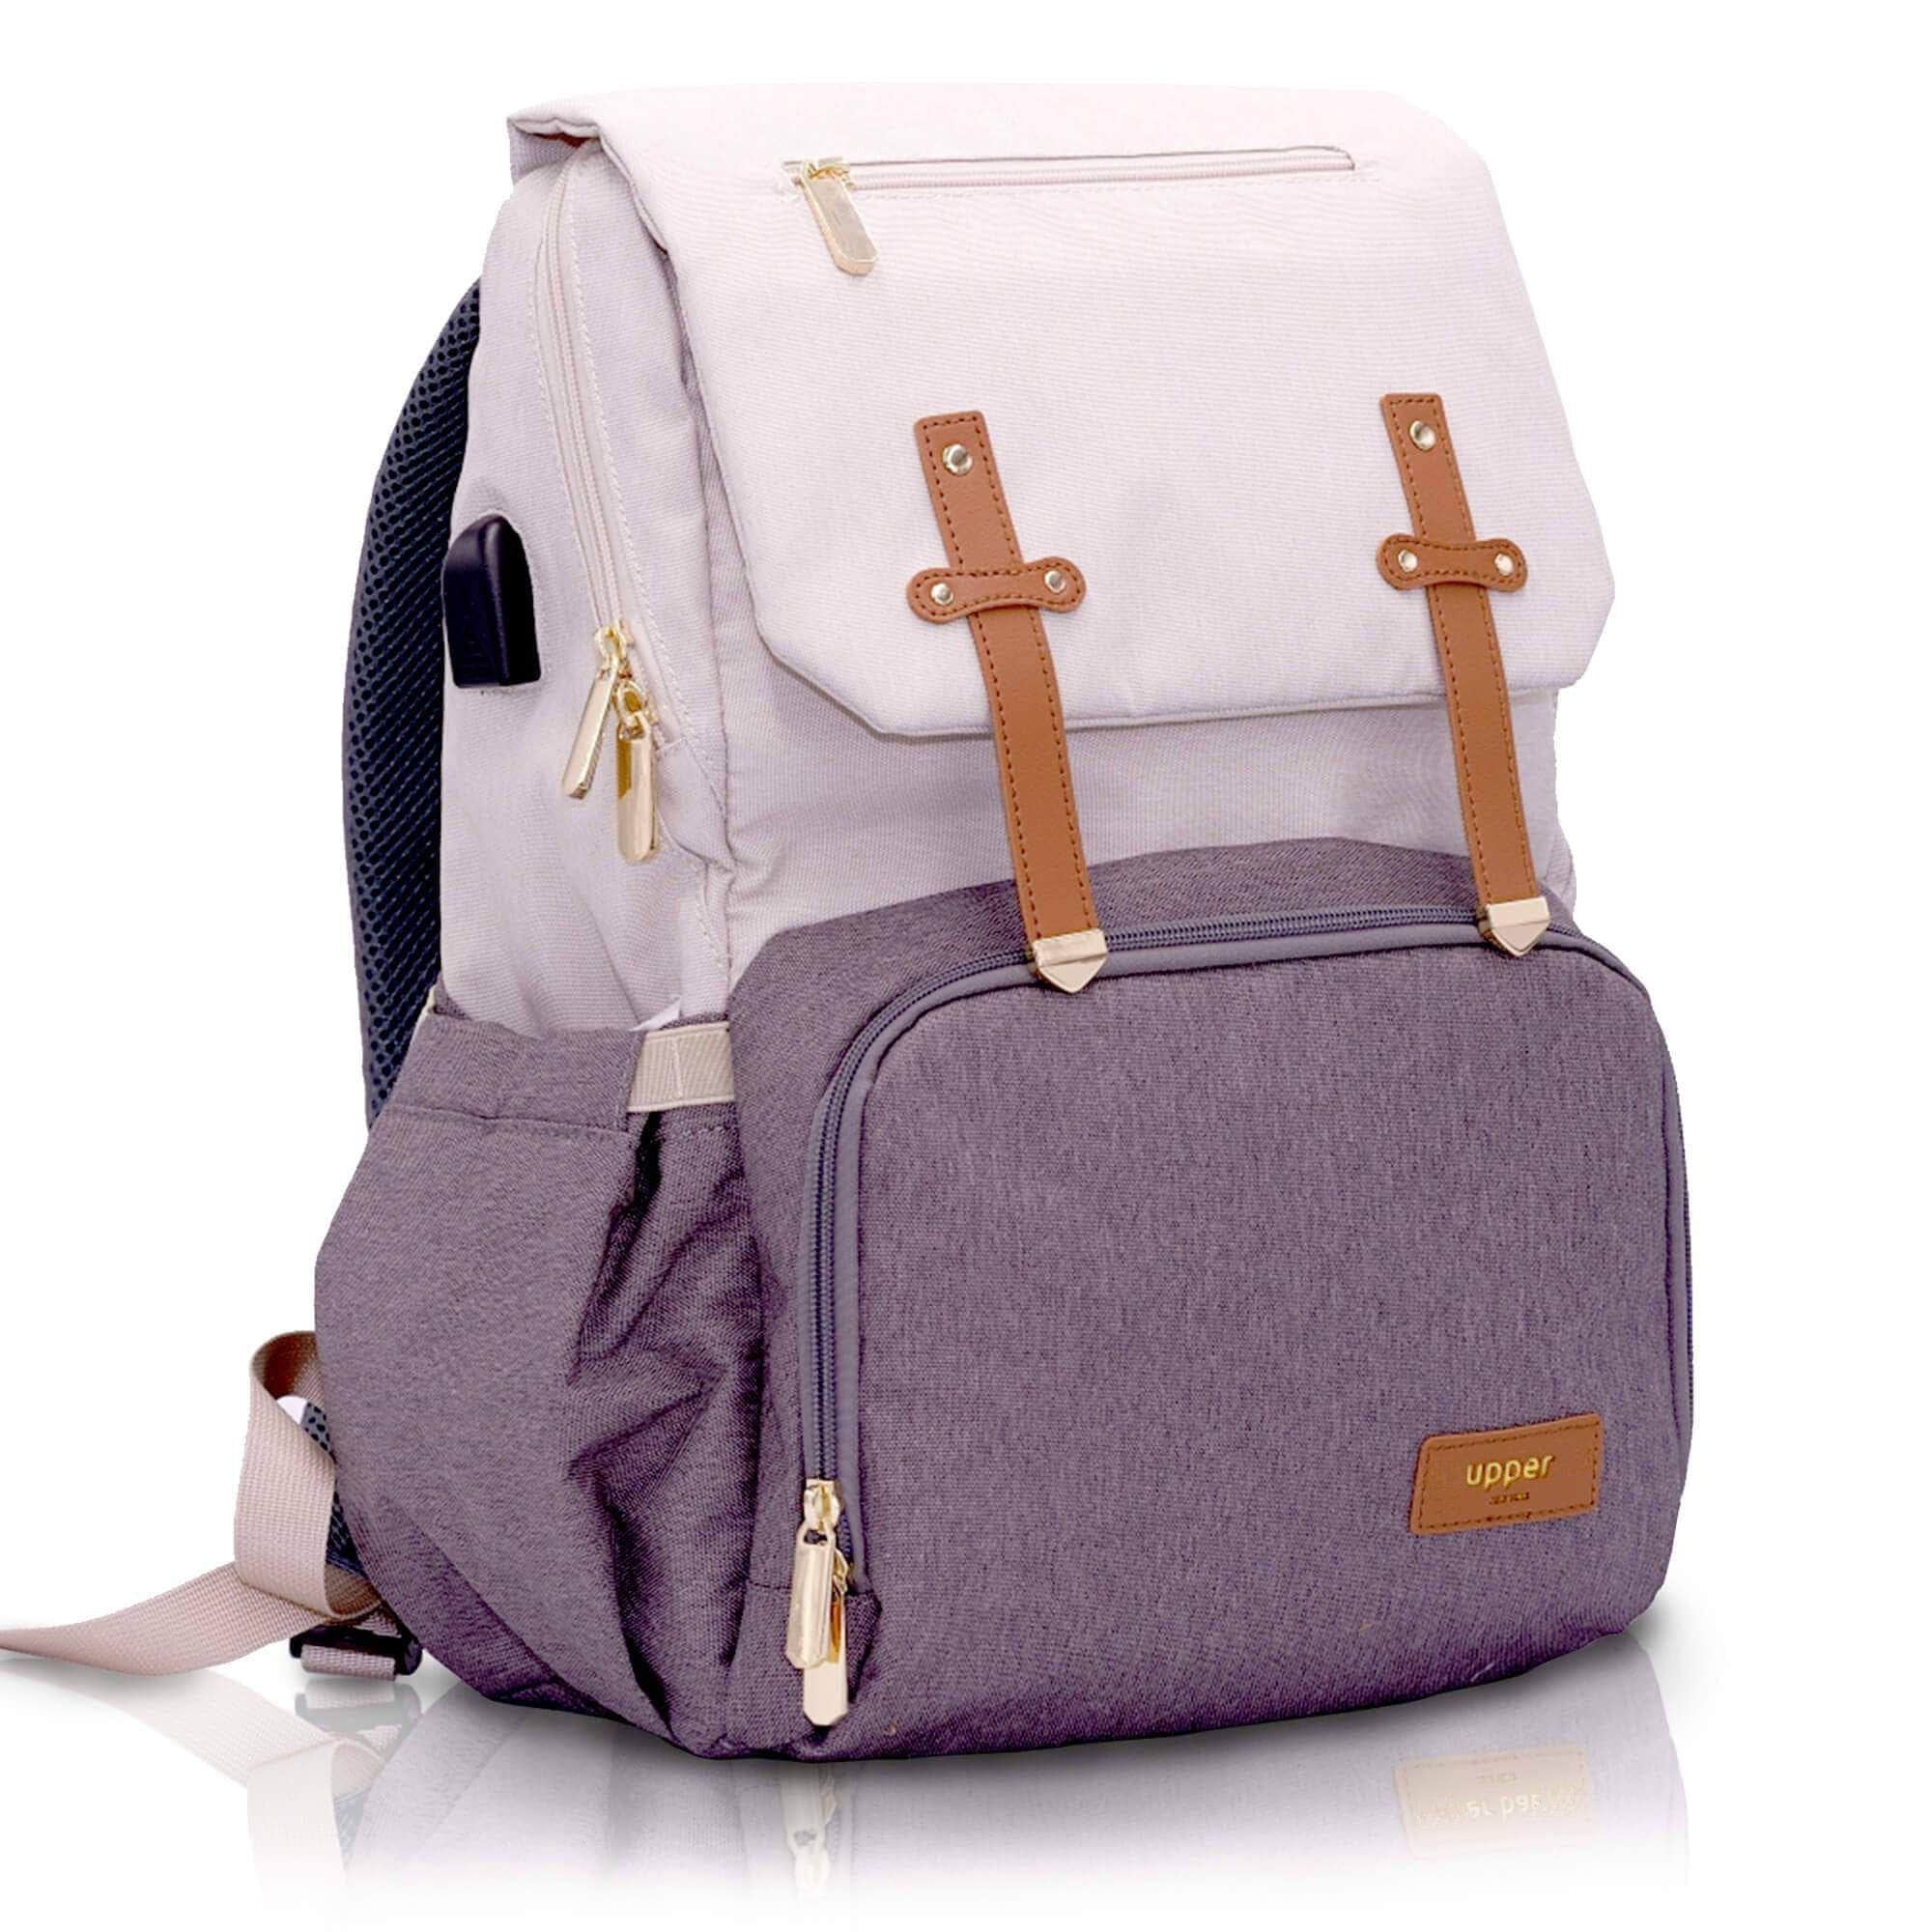 UPPER 549 - Luggage & Bags > Diaper Bags Beige/Grey Milan - Limited Edition (USB Charging + Bottle Warmer) Diaper Bag Backpack